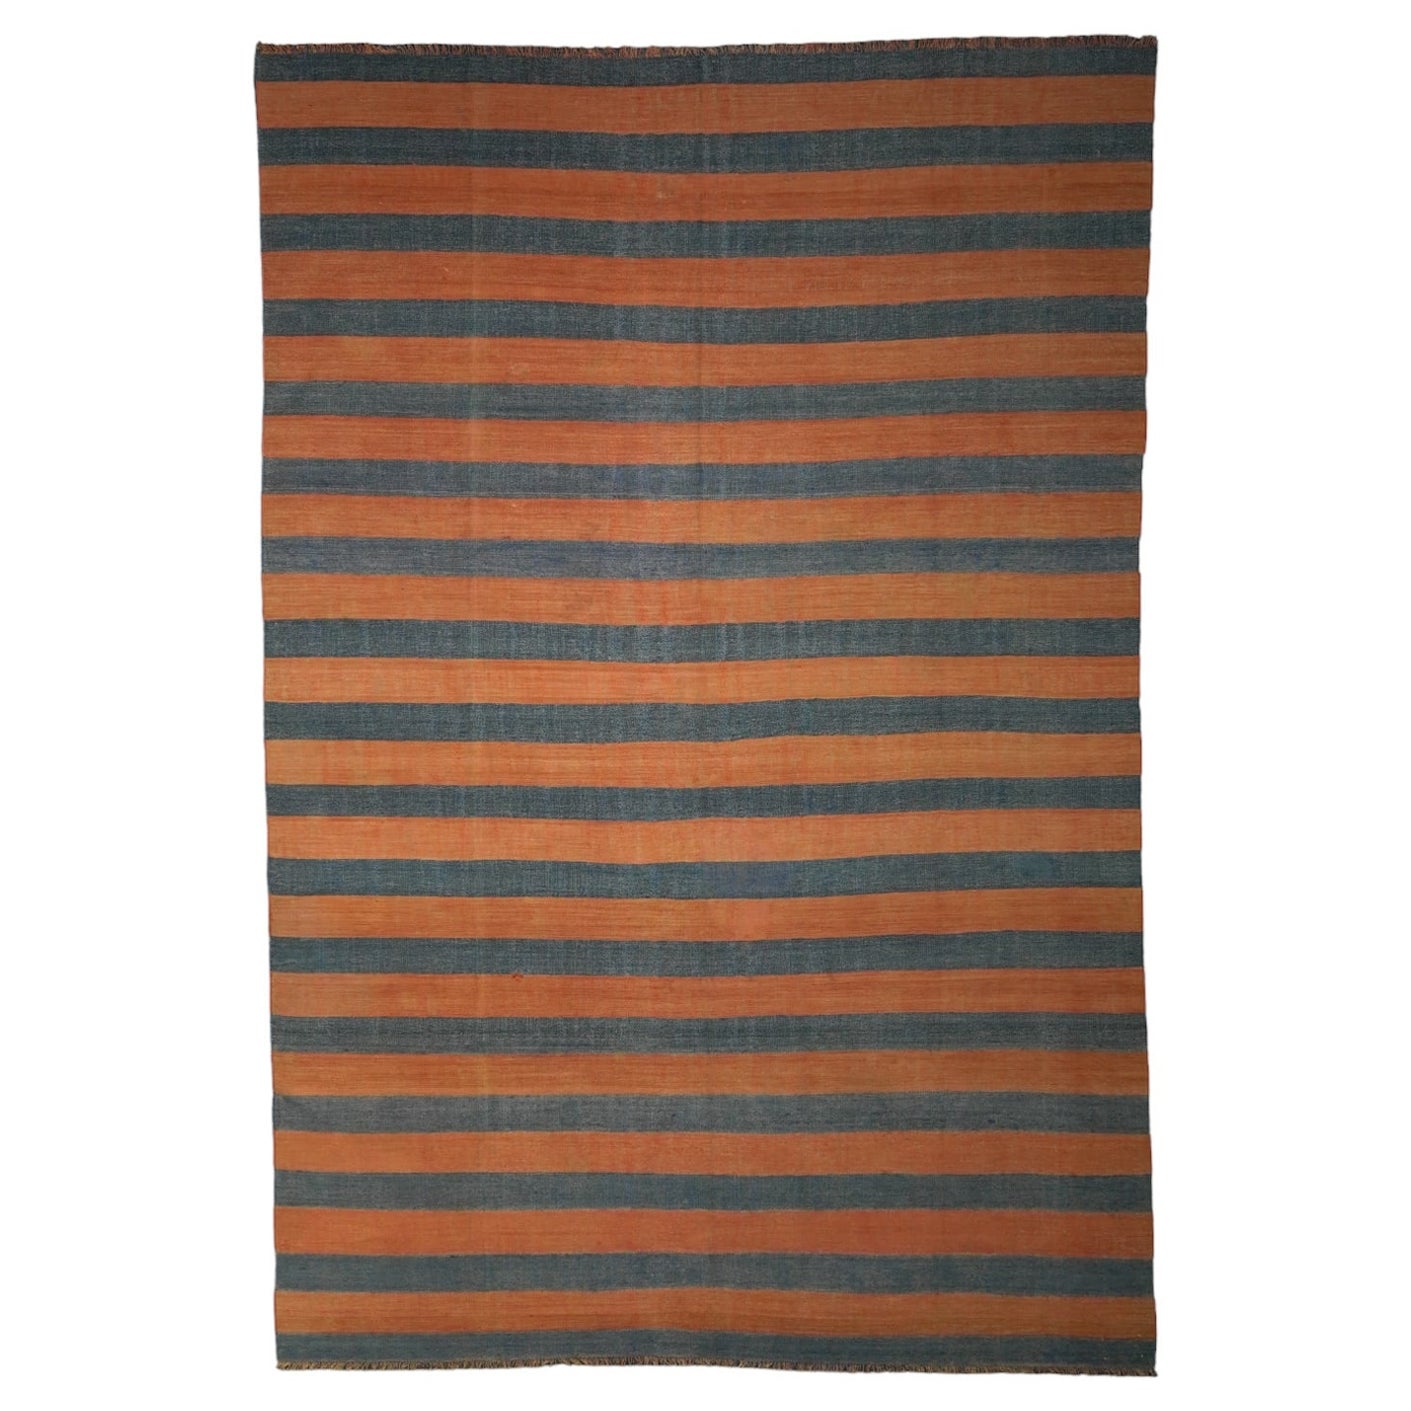 Vintage Dhurrie Rug, with Rust and Blue Stripes, from Rug & Kilim For Sale